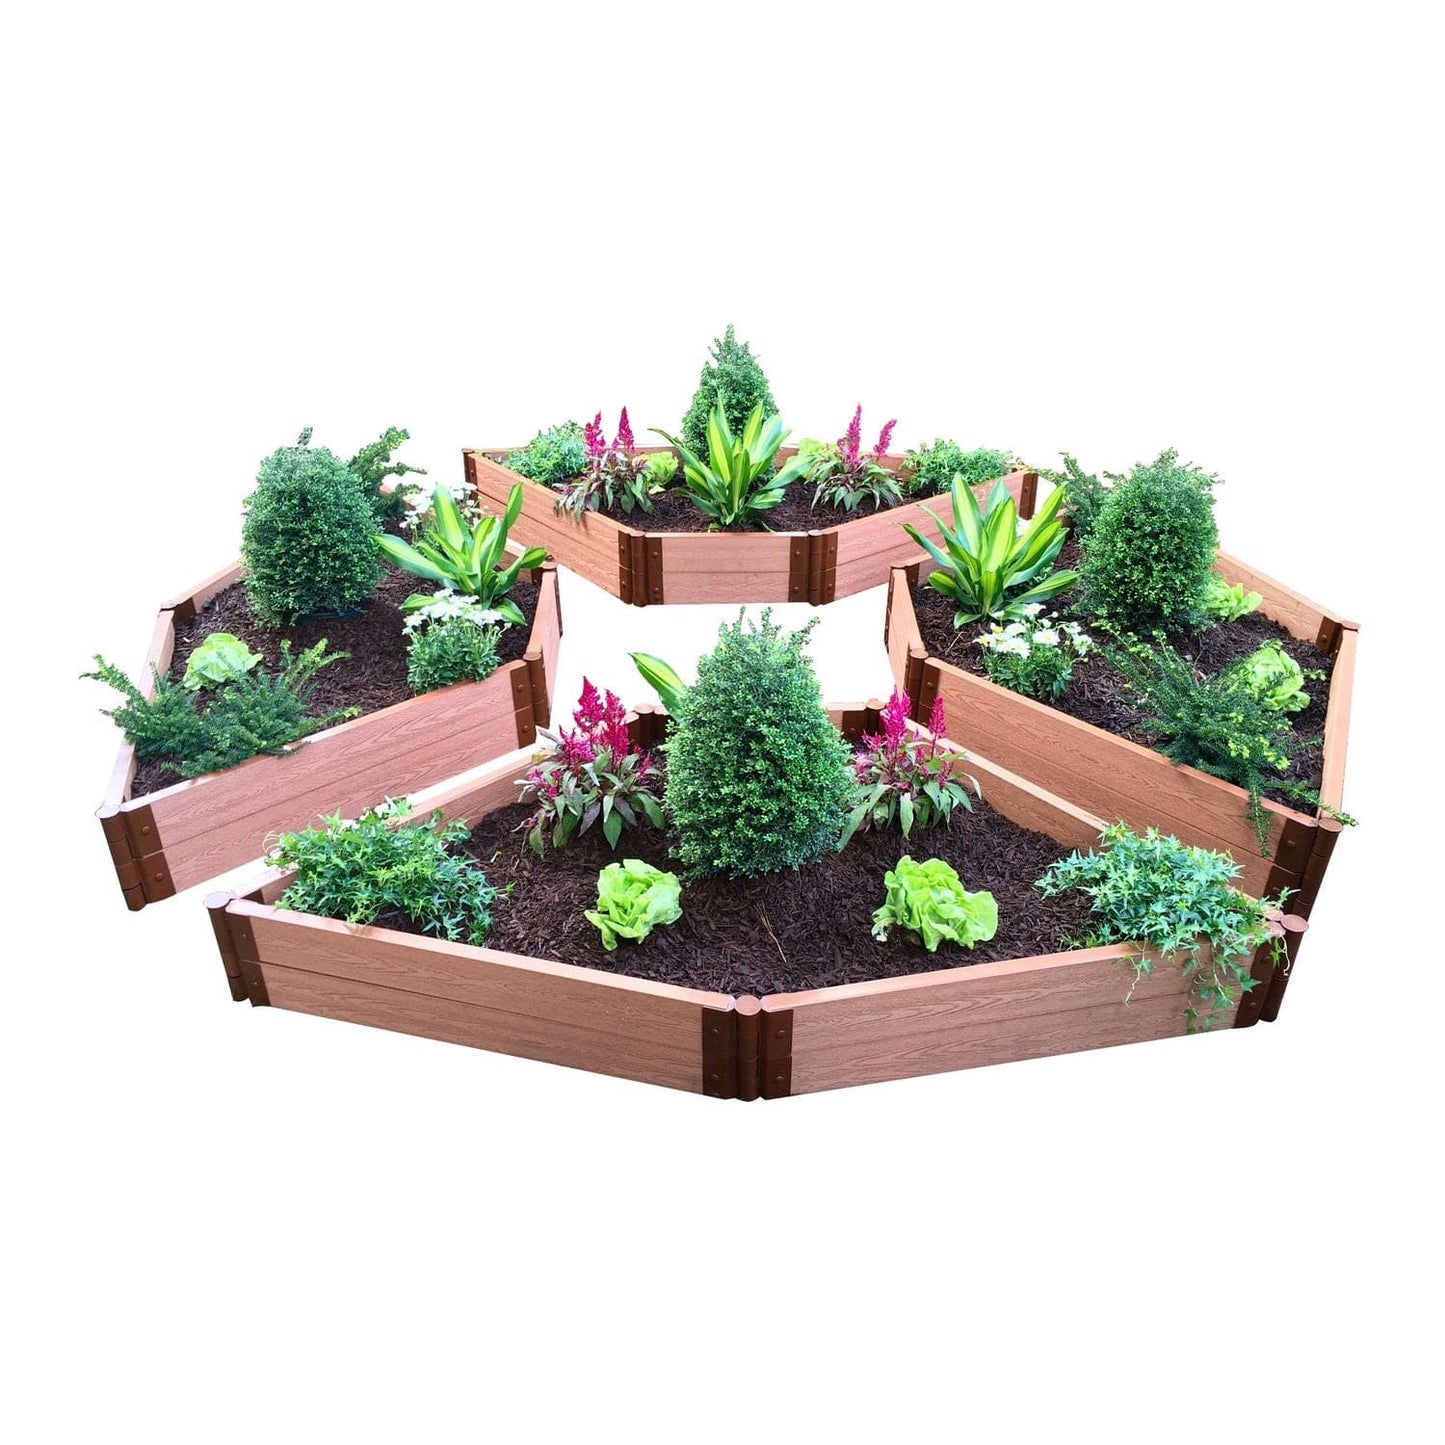 Frame It All Gardening Accessories Frame It All | Tool-Free Elizabethan Garden Raised Garden Bed (4-Sided Triangle) 12' X 12' X 11" - Weathered Wood - 1" Profile 200002476